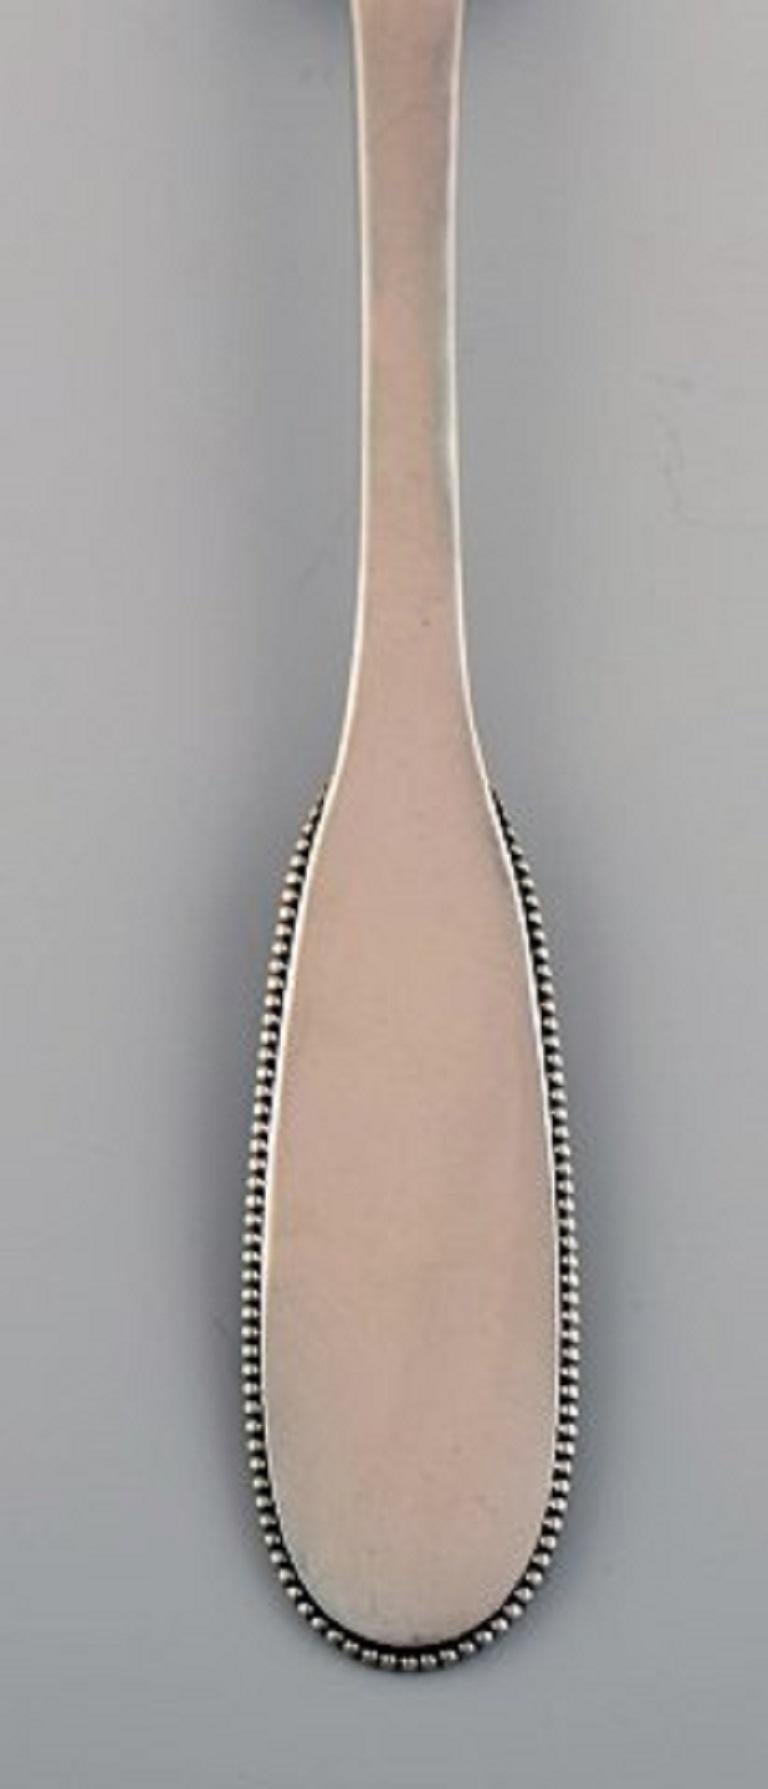 Evald Nielsen number 14 dinner fork in hammered silver, 1920s.
Measures: Length 21 cm.
Stamped.
In excellent condition.
Our skilled Georg Jensen silversmith / goldsmith can polish all silver and gold so that it looks like new. The price is very